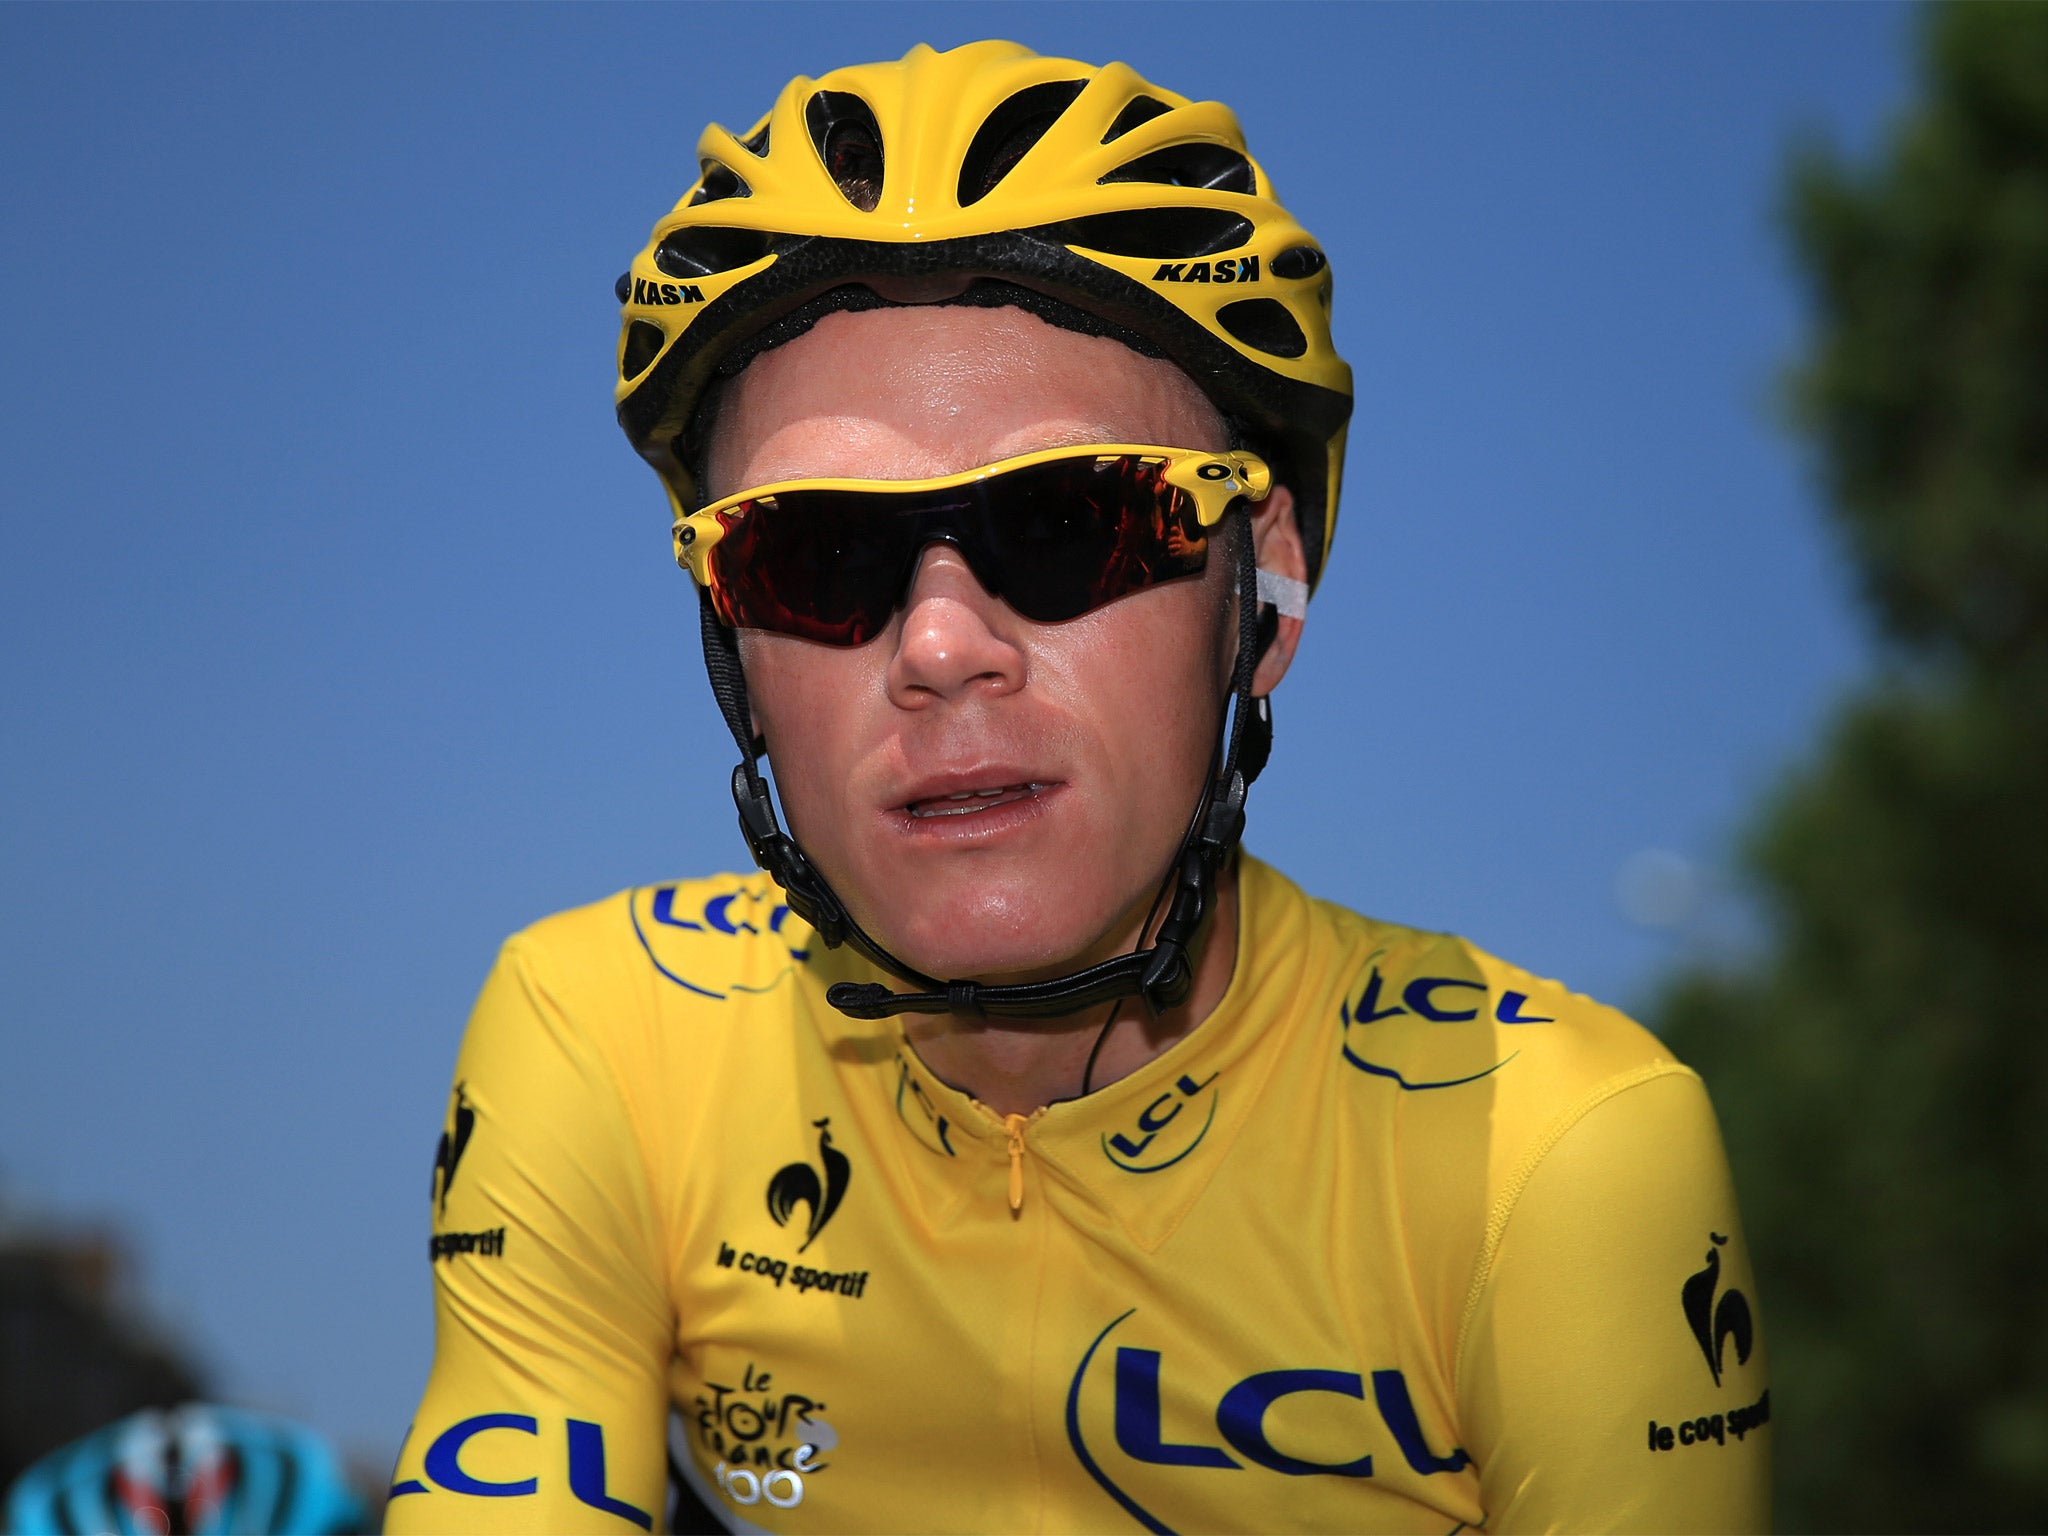 Chris Froome won the Tour de France in 2013